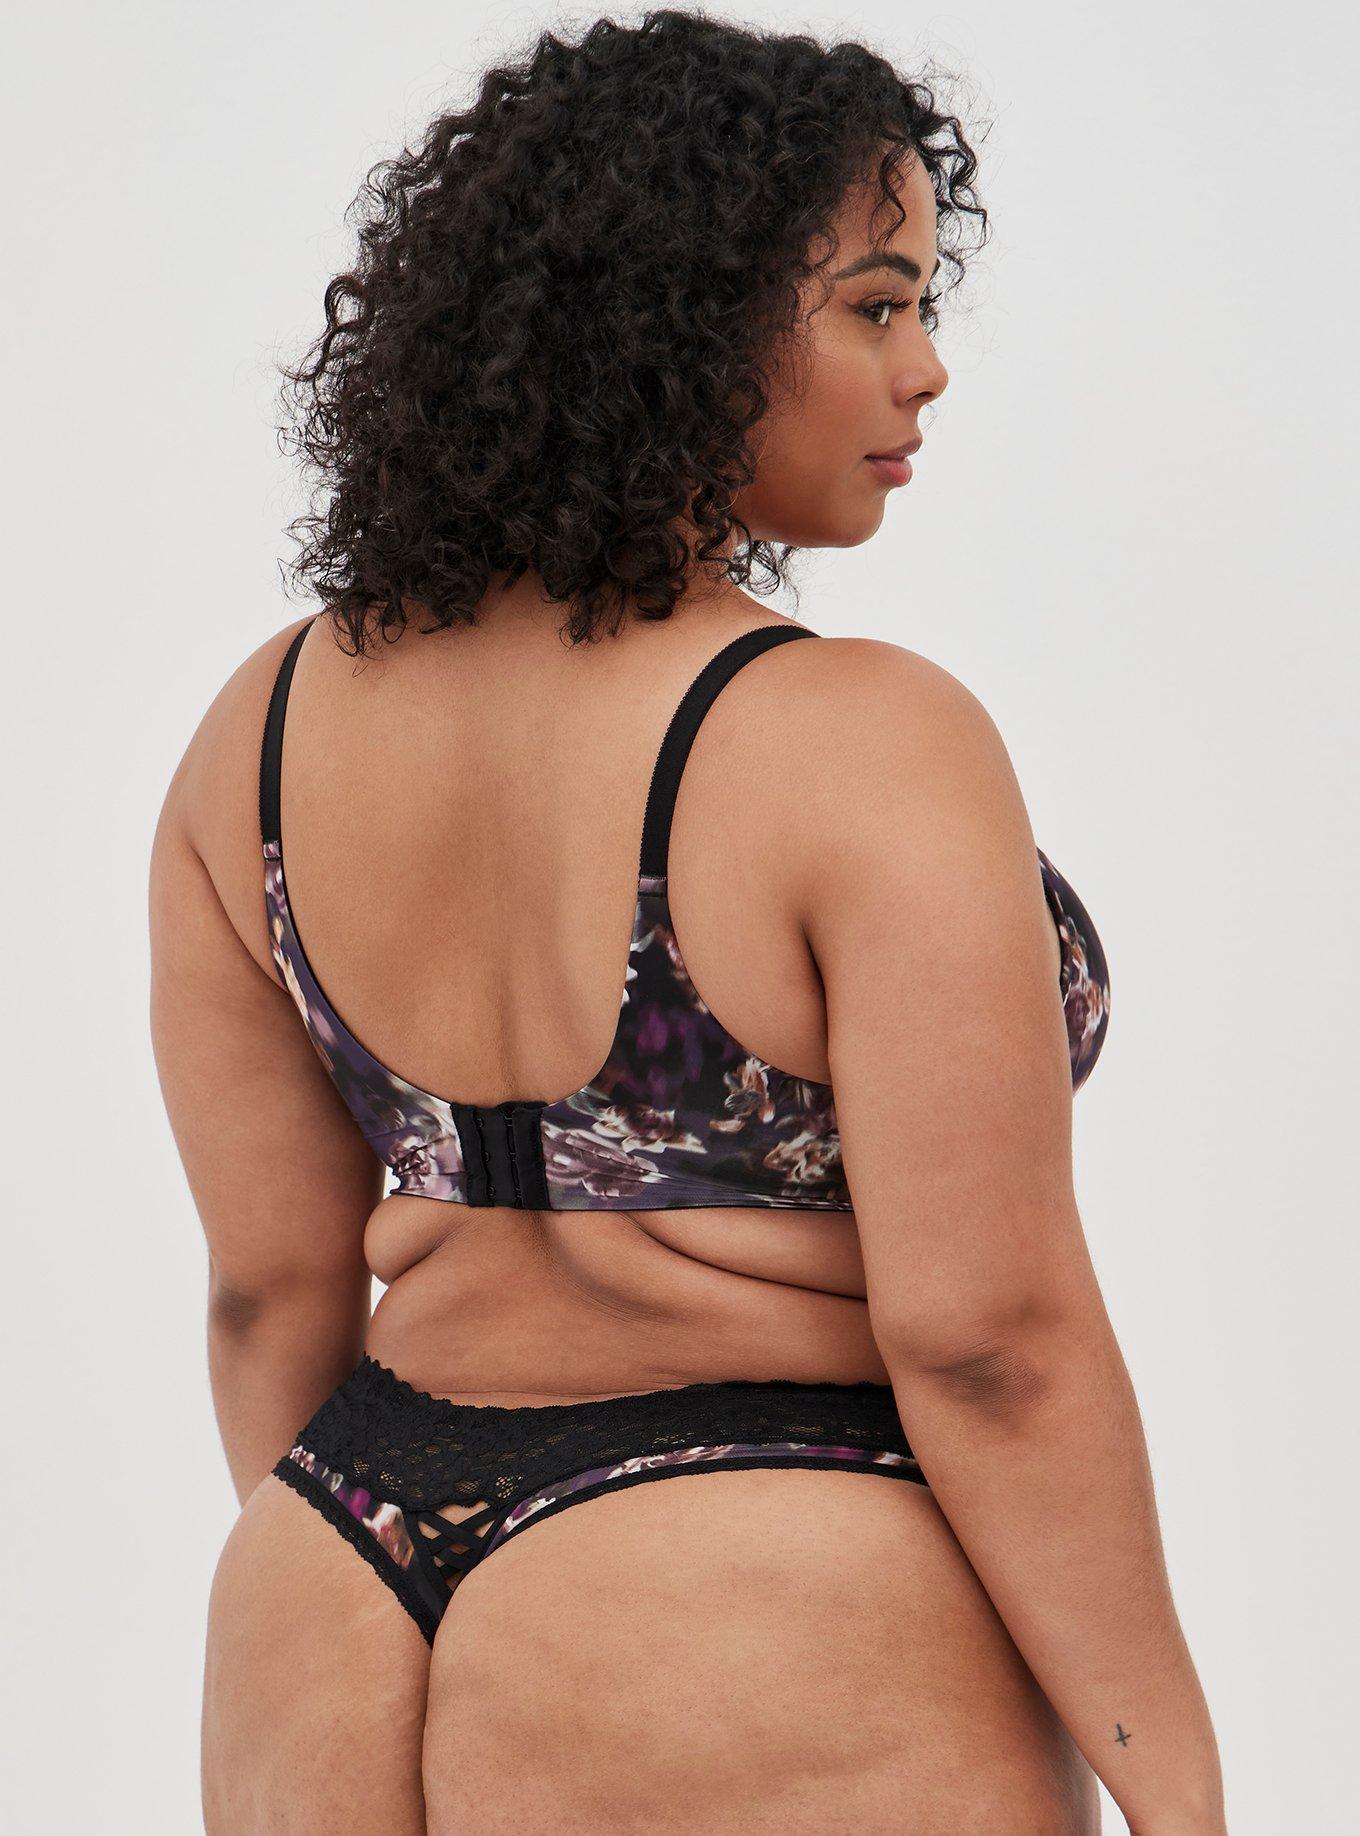 Plus Size Mutant High Waist Thong with Lace Inserts - Krisline CANDY